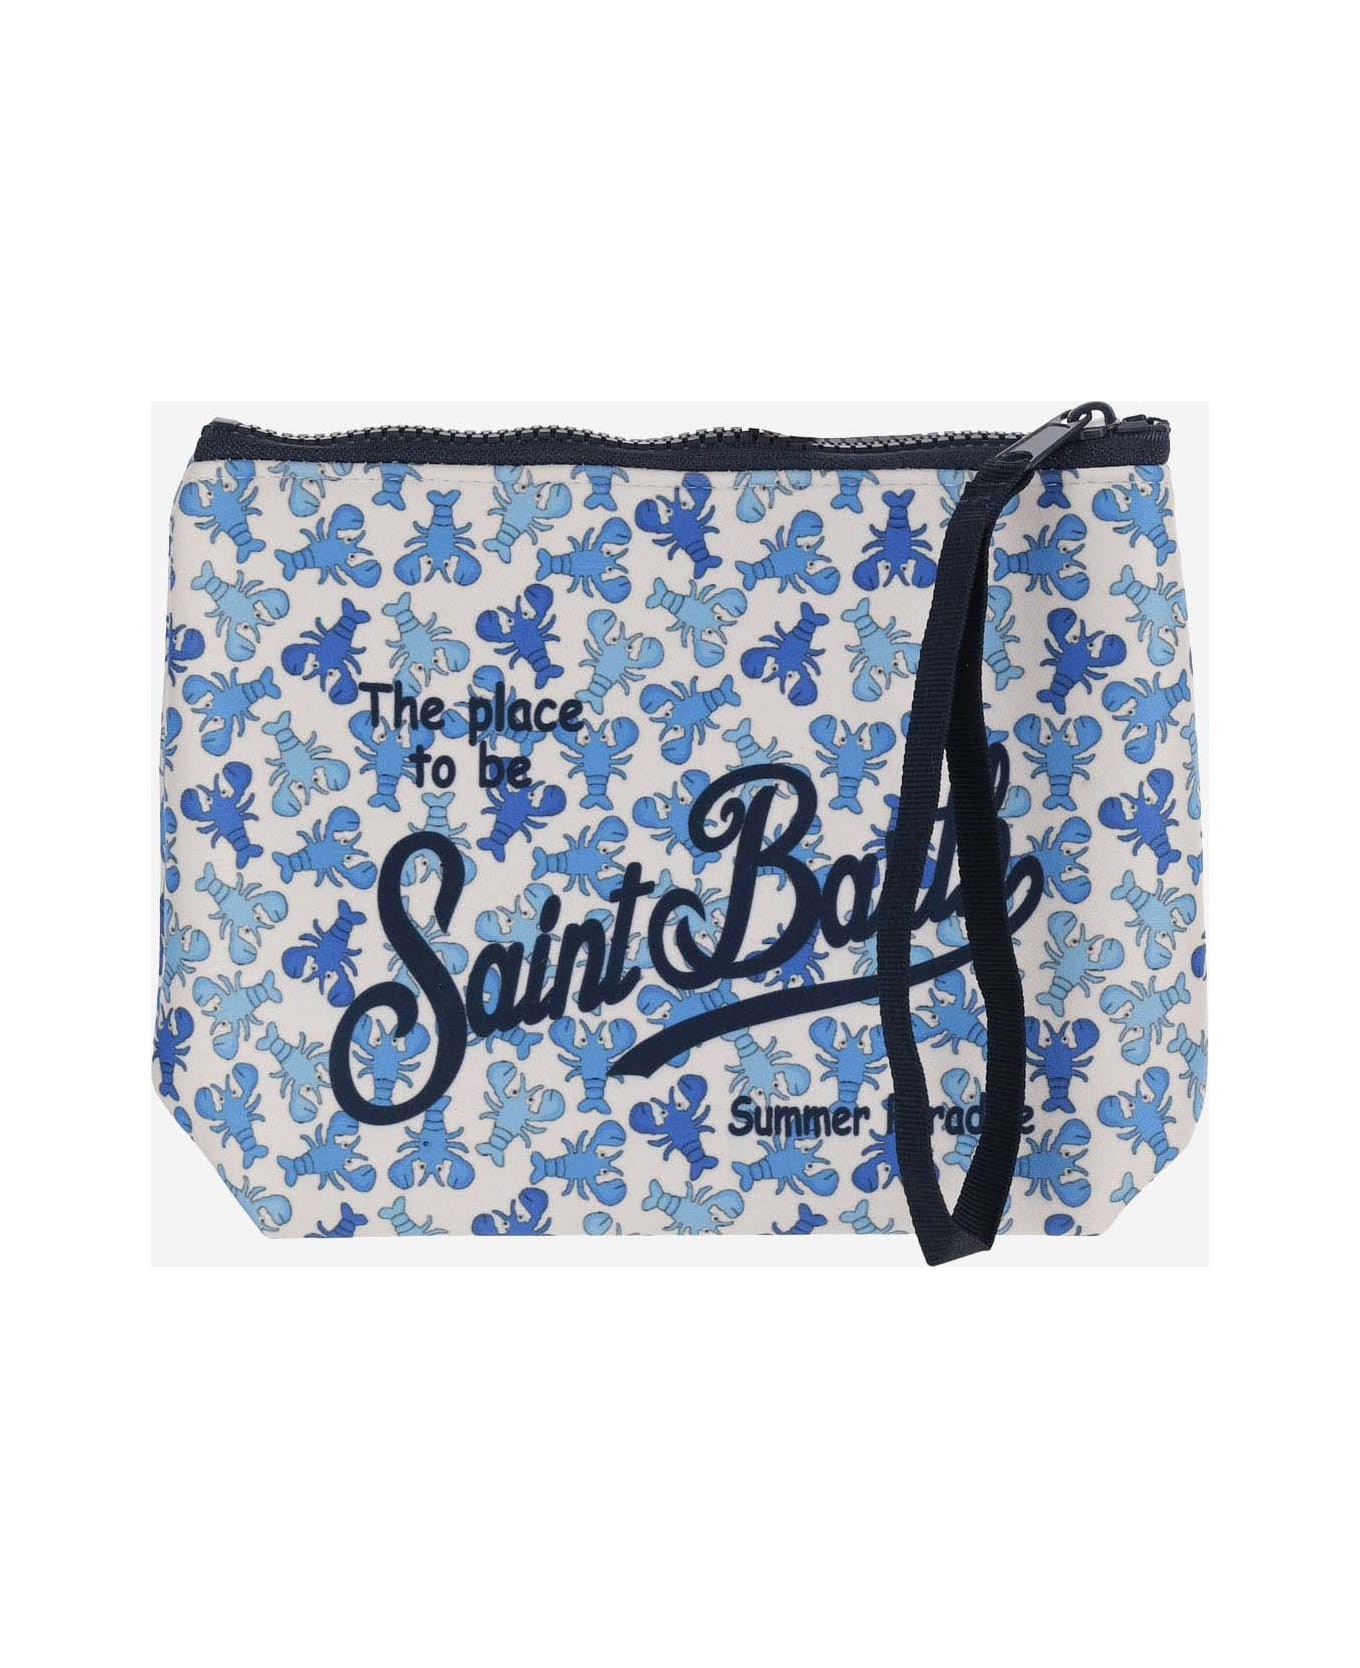 MC2 Saint Barth Scuba Clutch Bag With Graphic Print - Red クラッチバッグ